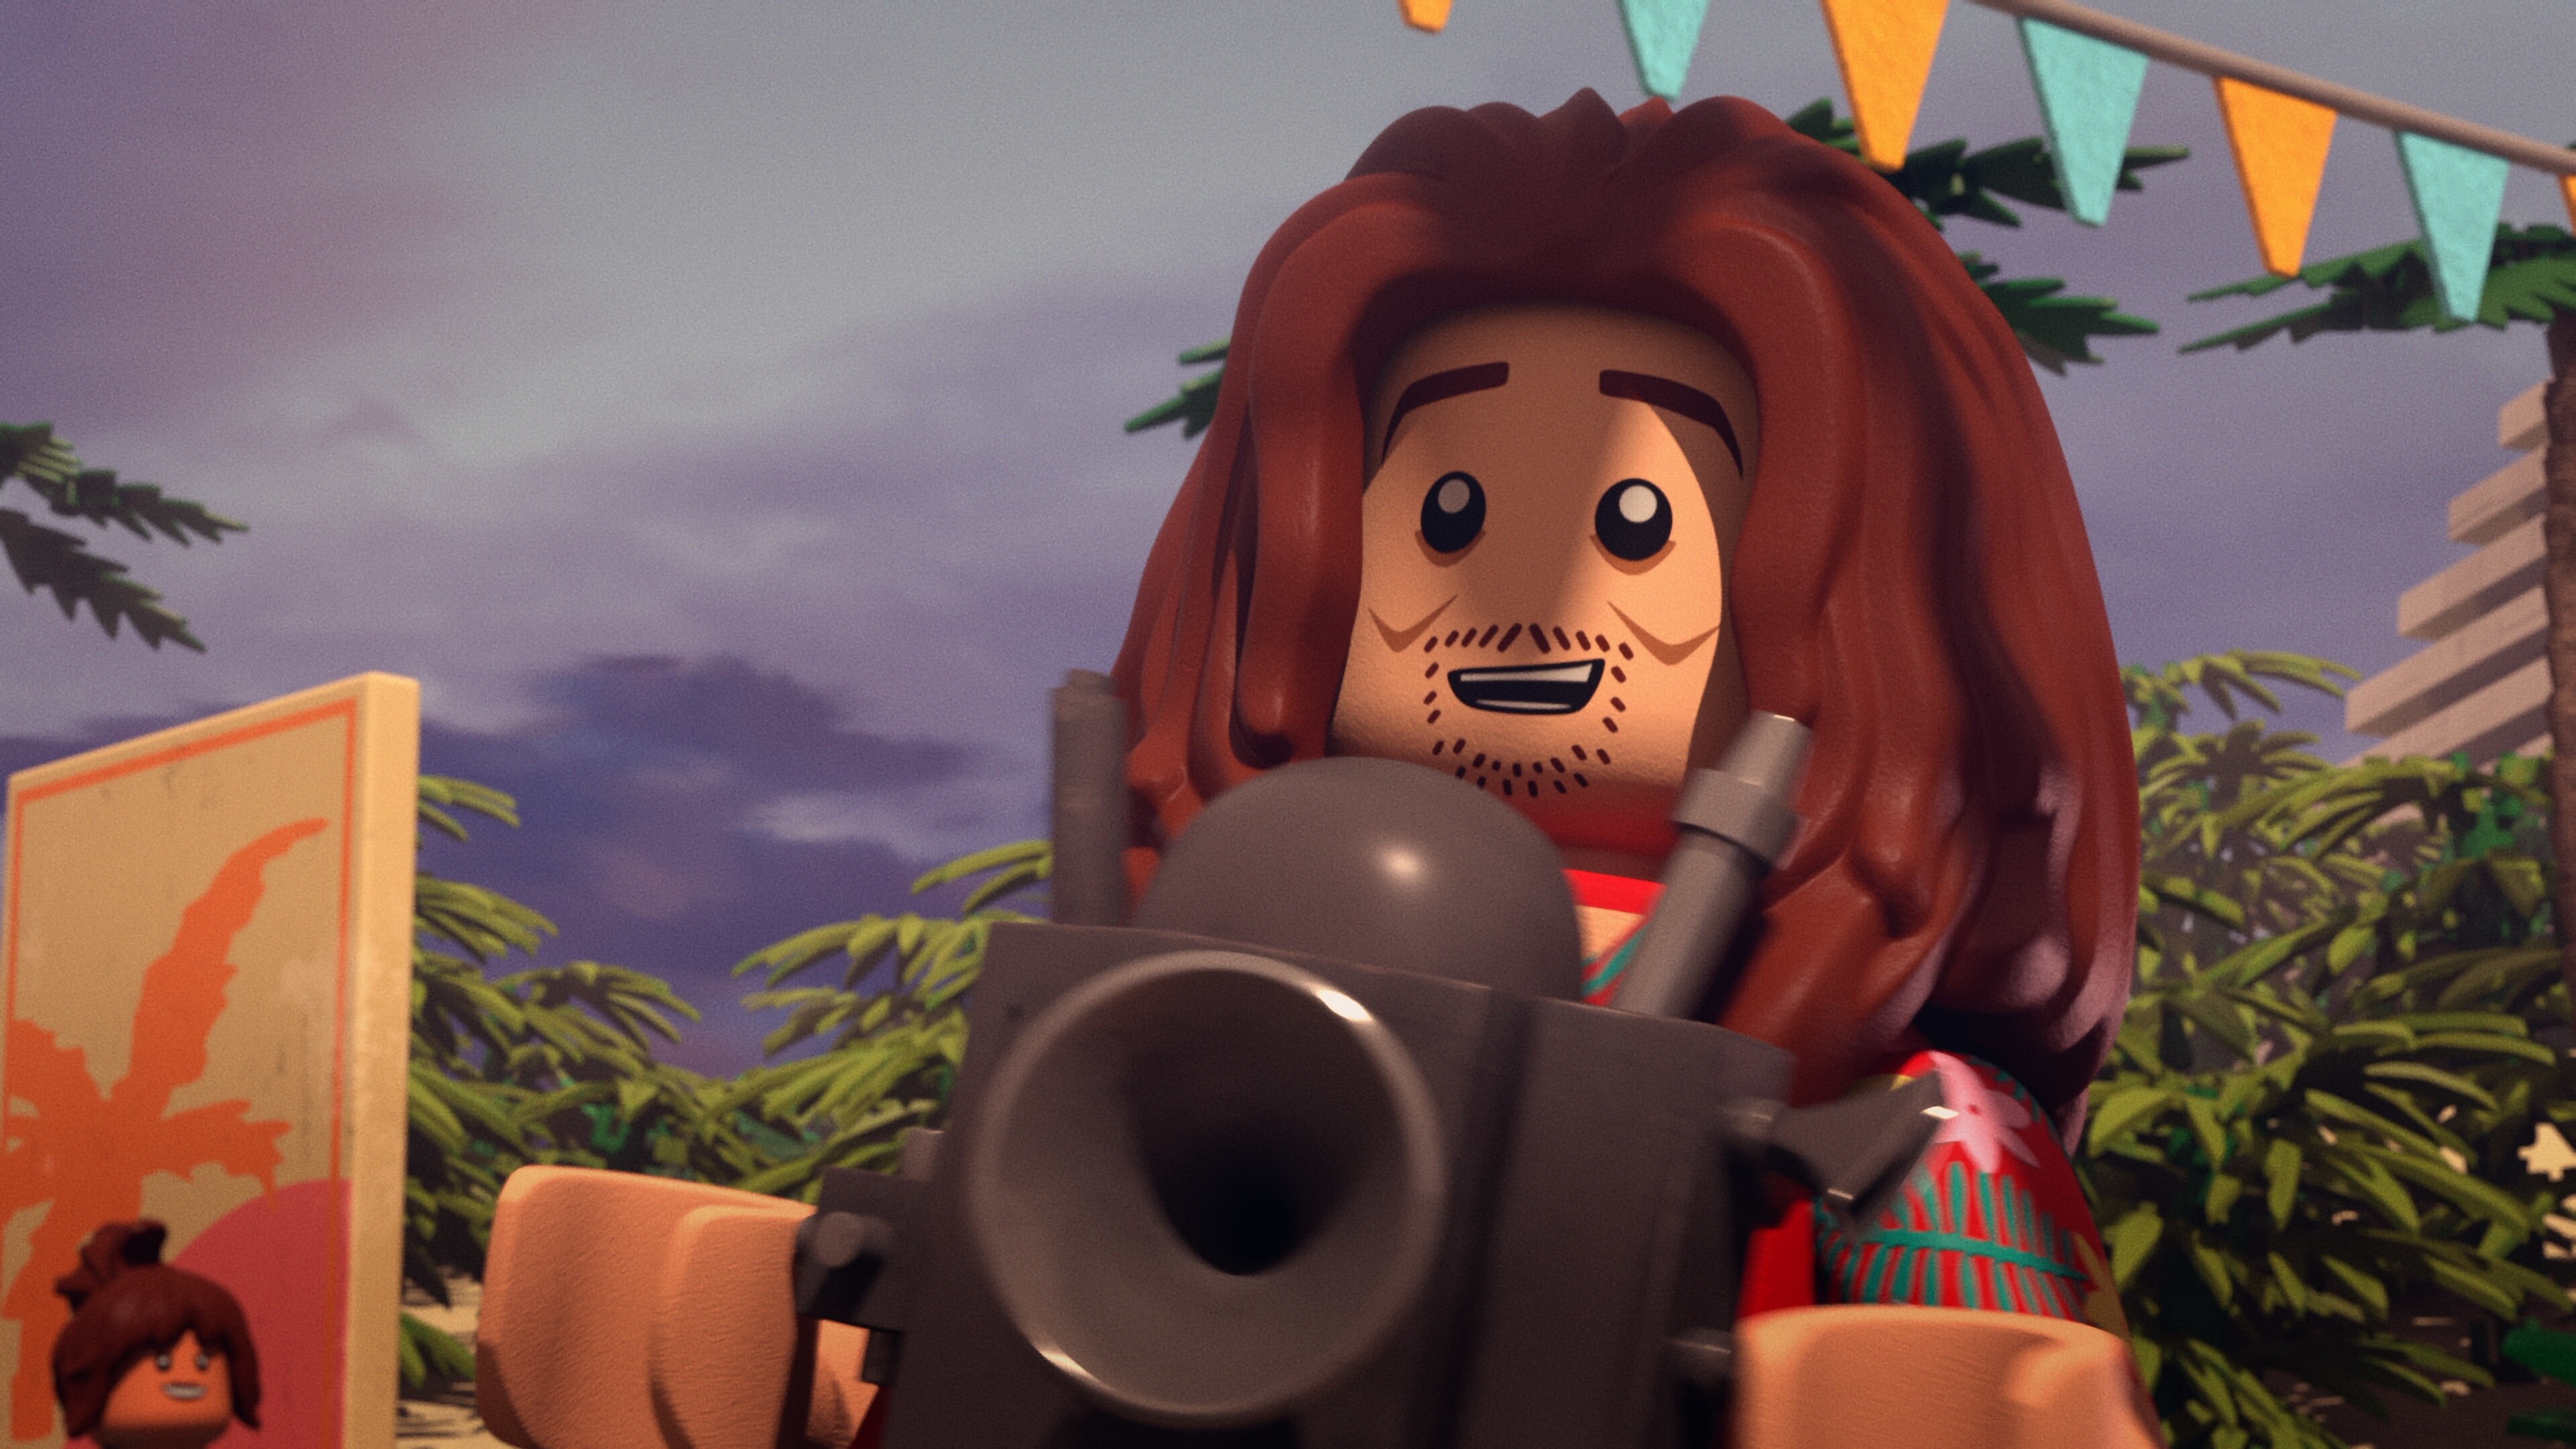 Vic Vankoh in LEGO® STAR WARS SUMMER VACATION exclusively on Disney+. ©2022 Lucasfilm Ltd. & TM. All Rights Reserved.